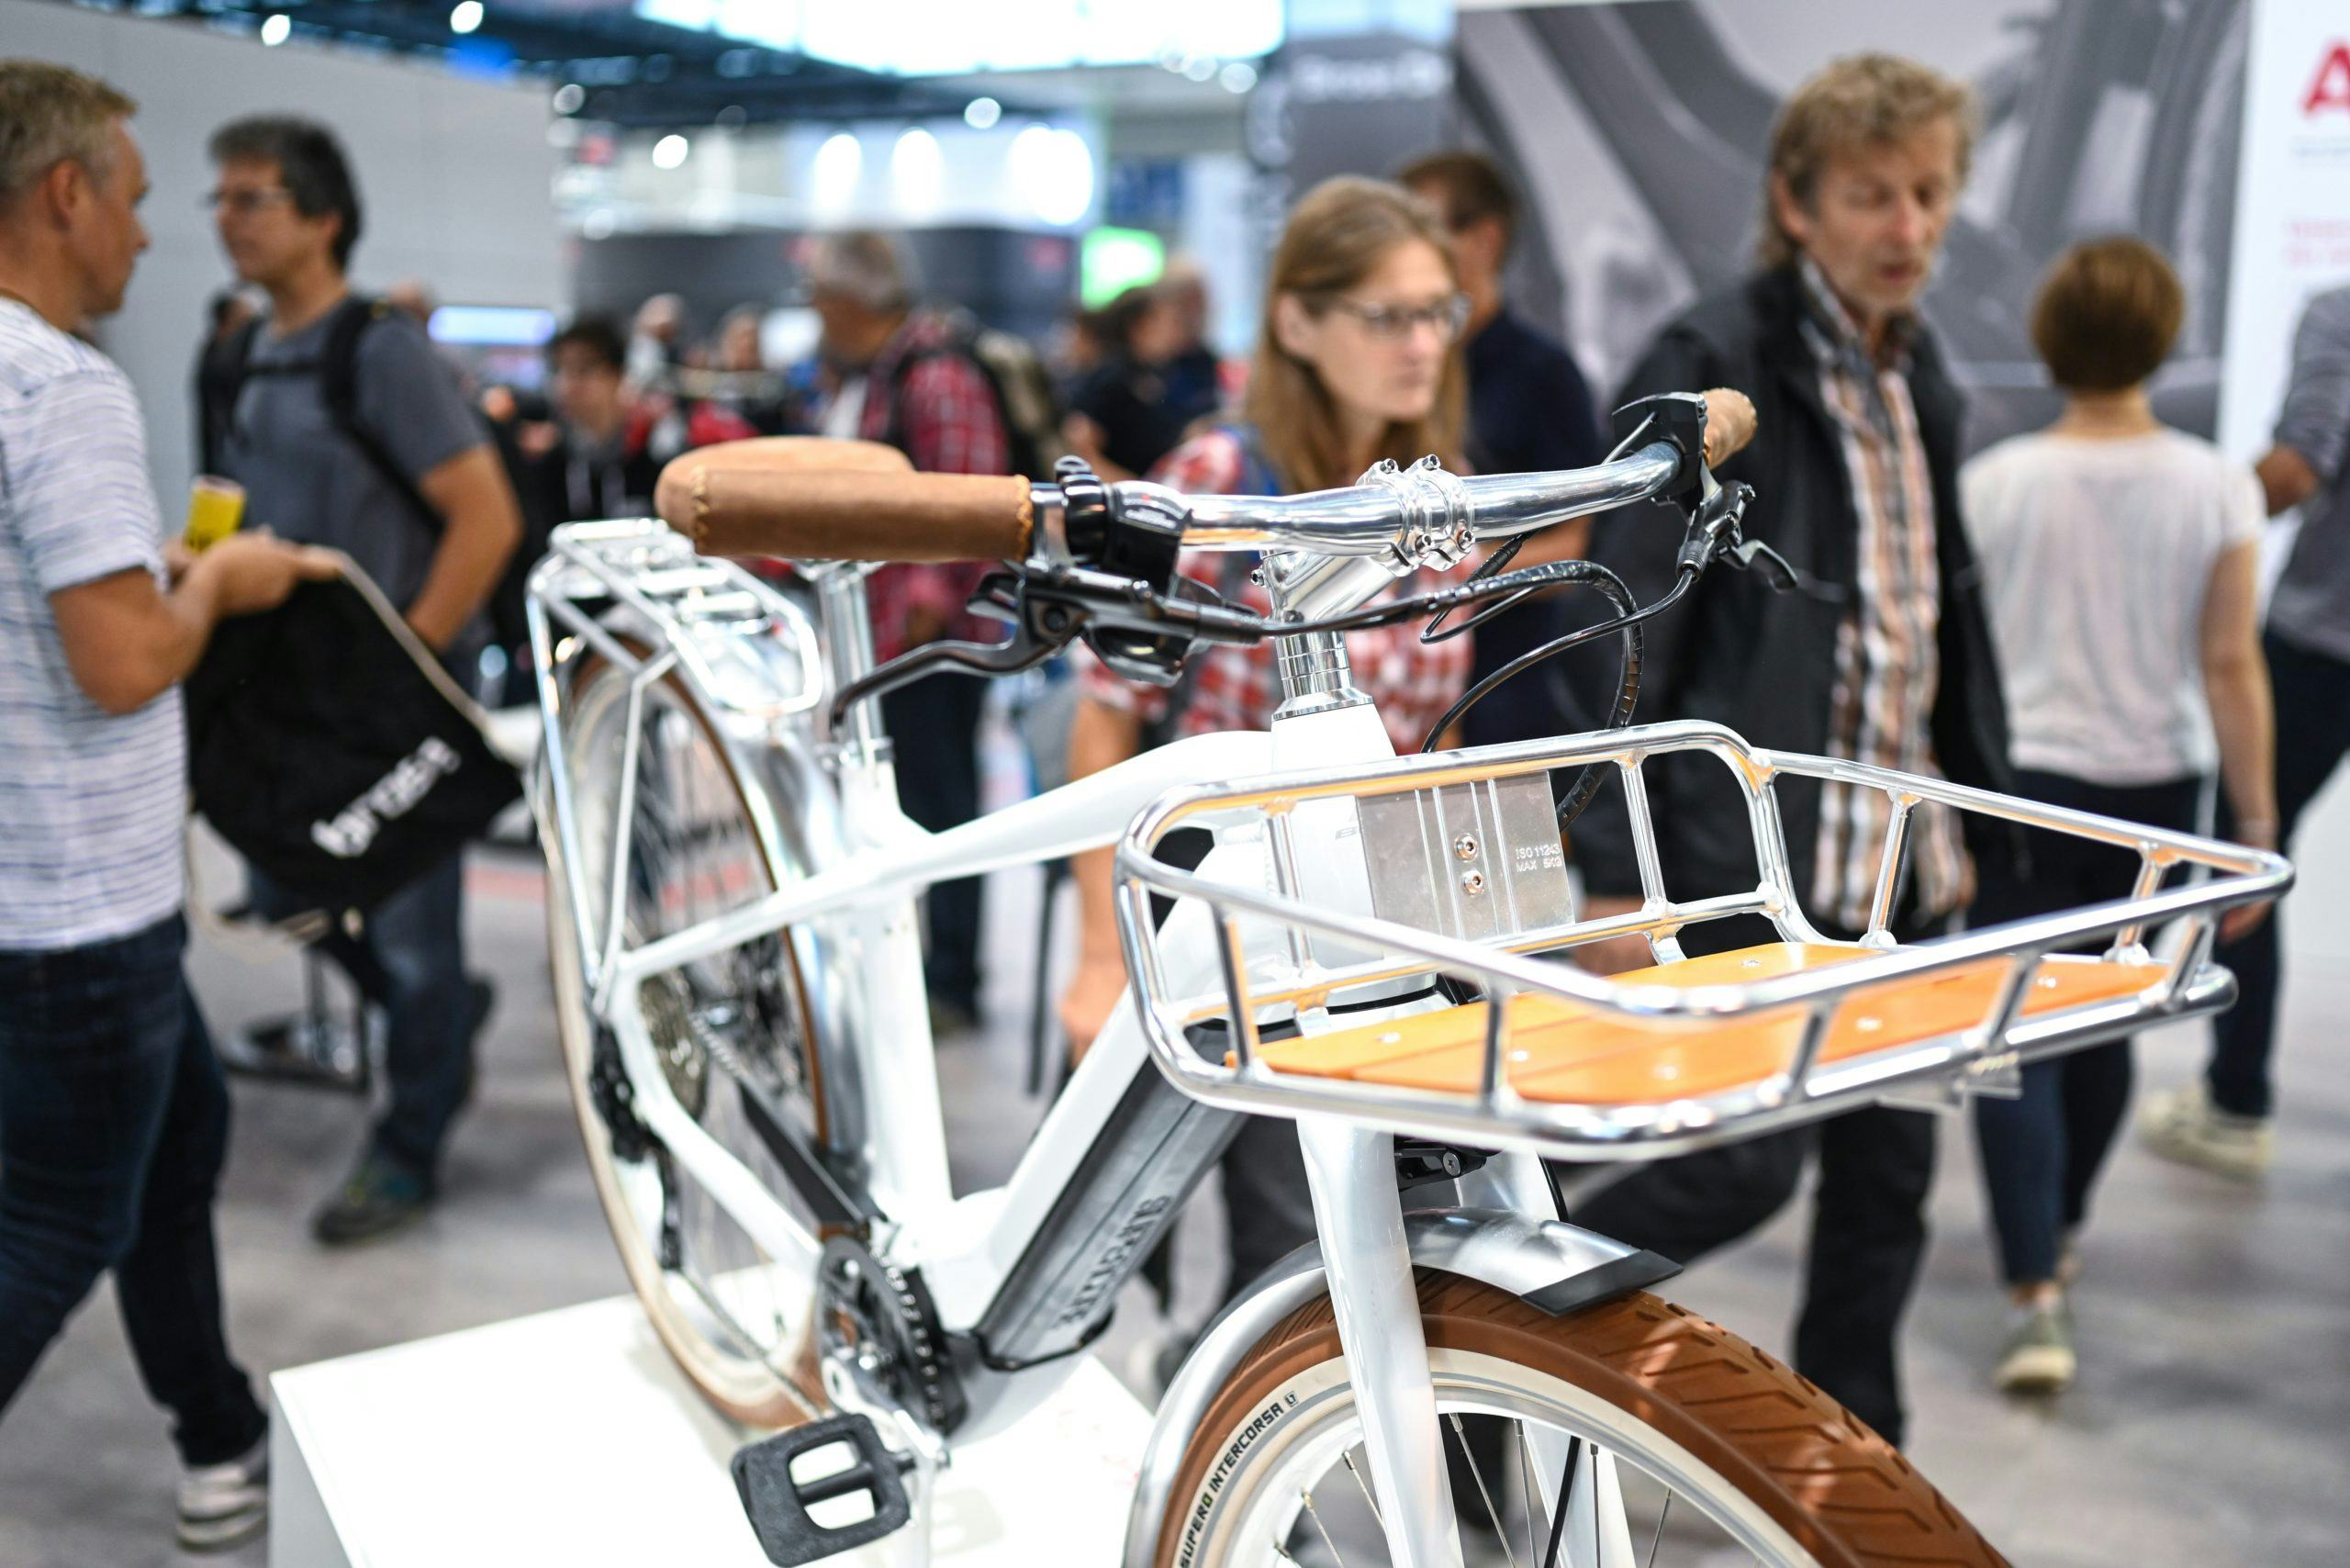 Eurobike is looking forward to being one of the few tradeshows this year to take place as a live, physical event. – Photo Eurobike 